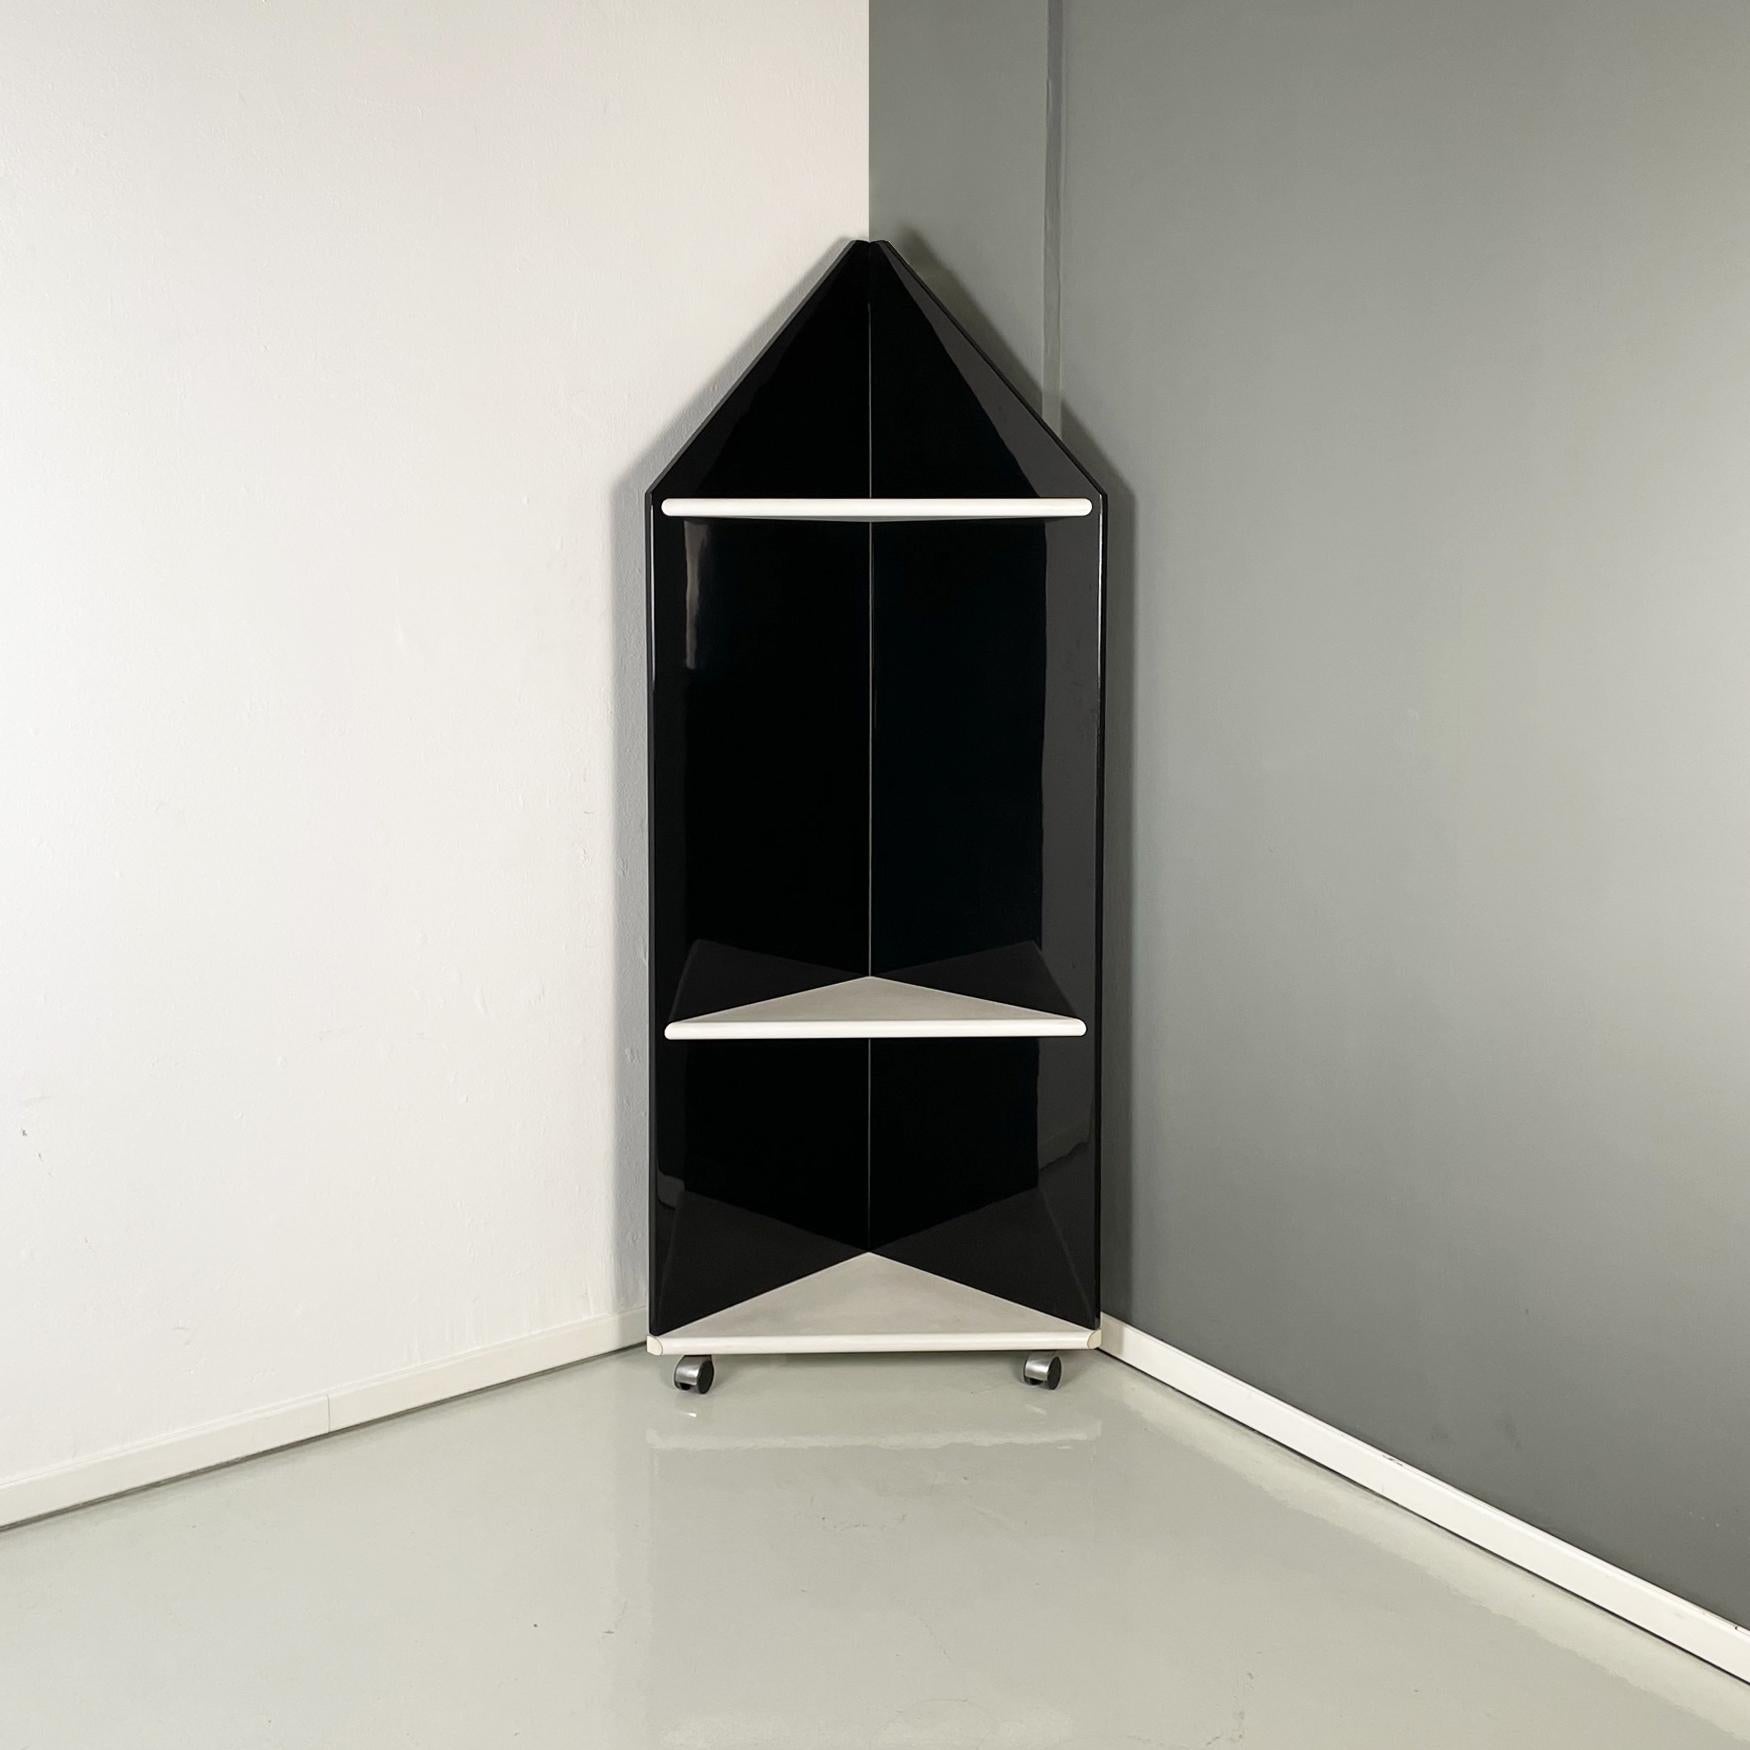 Italian modern Angular bookcase in black lacquered and white wood, 1980s
Elegant and fantastic angular bookcase with triangular base in black lacquered wood. It has 3 triangular shelves in white painted wood. This bookcase has at the base 3 wheels.